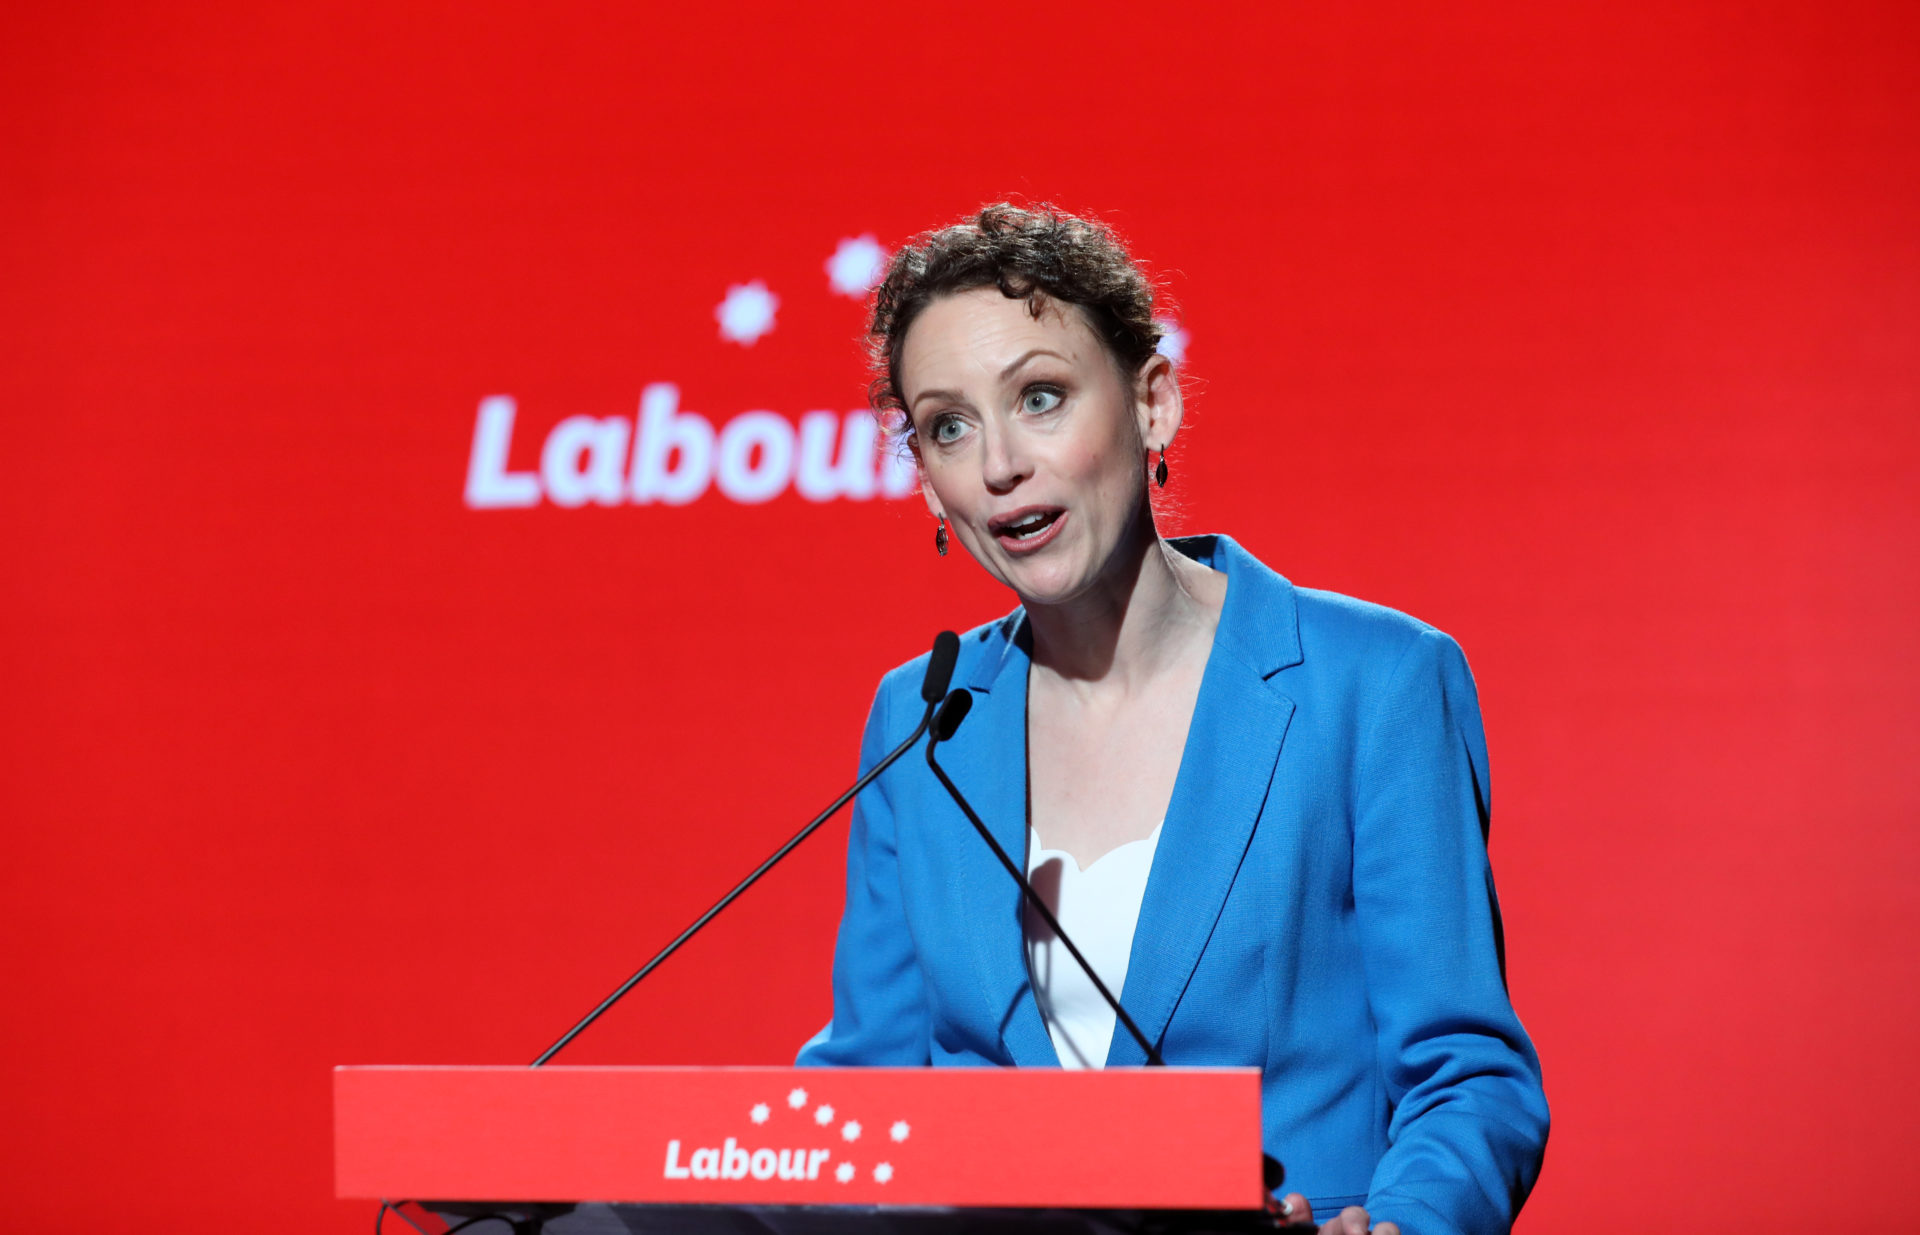 'A question of fairness' Labour calls for Good Friday bank holiday